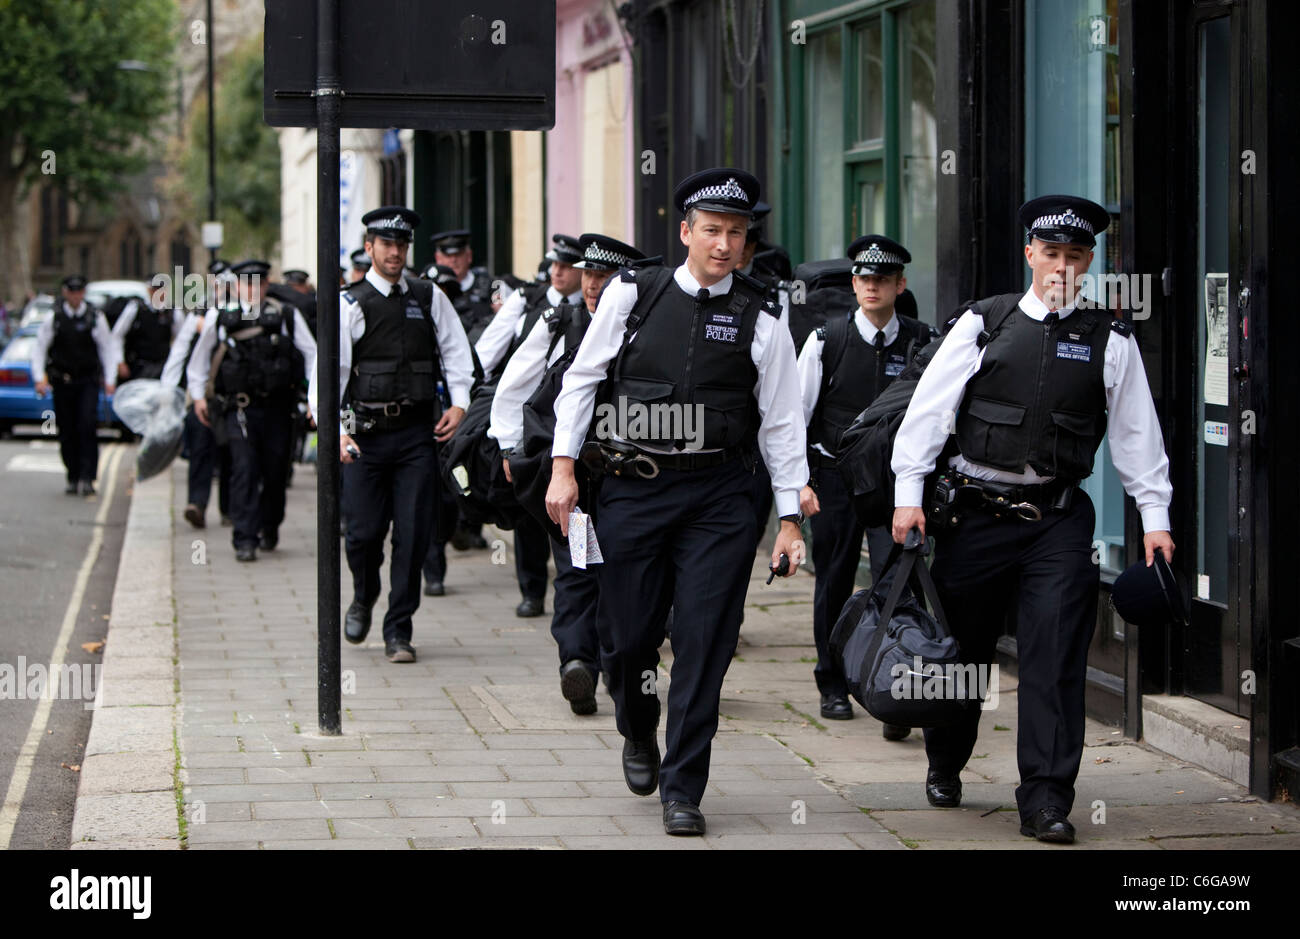 A group of Metropolitan police officers arriving at Notting Hill Carnival 2011, London, England, UK, GB. Stock Photo